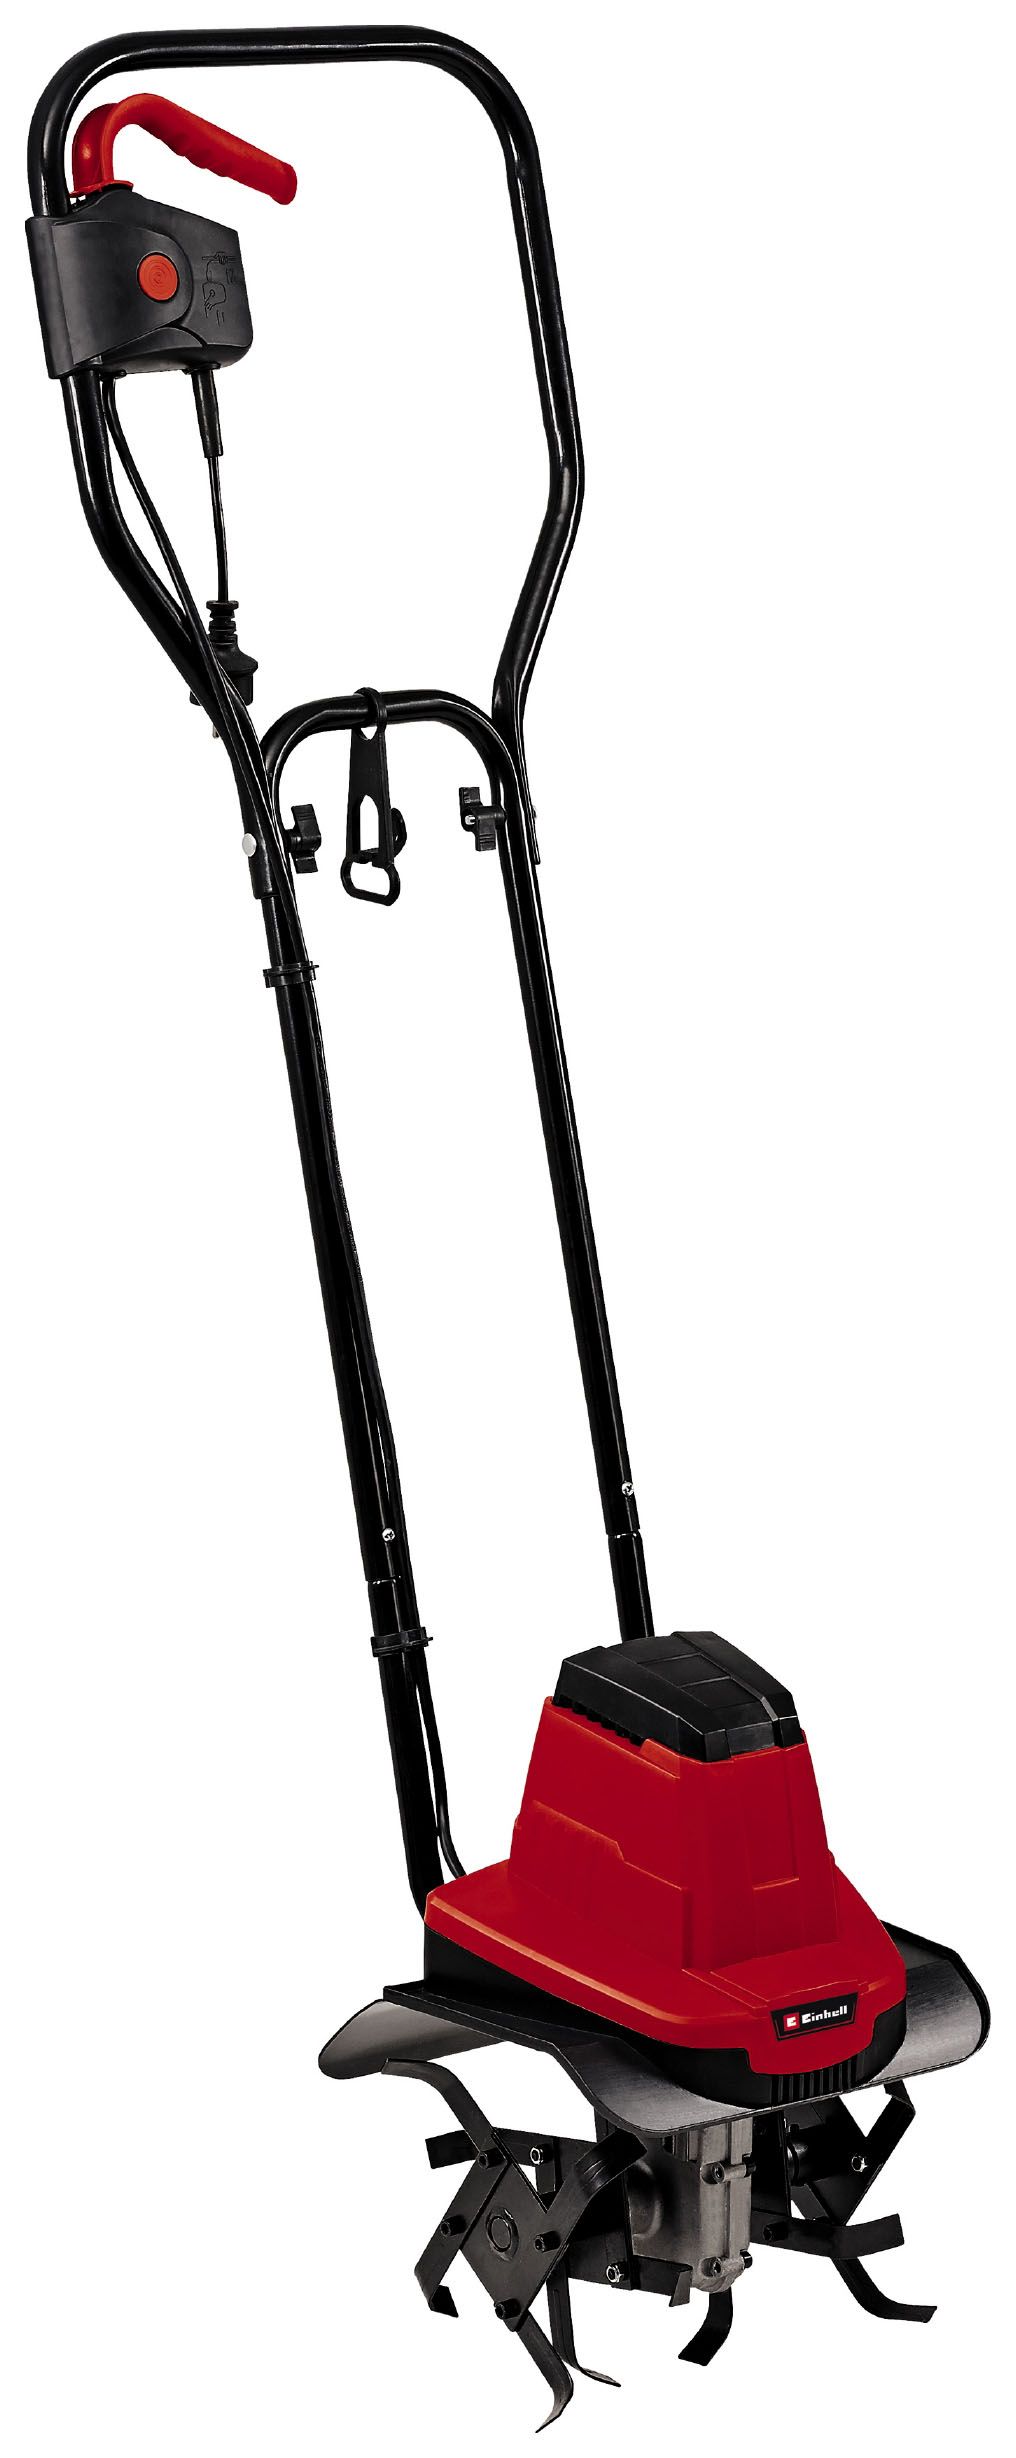 Image of Einhell GC-RT 7530 750W 30cm Electric Tiller